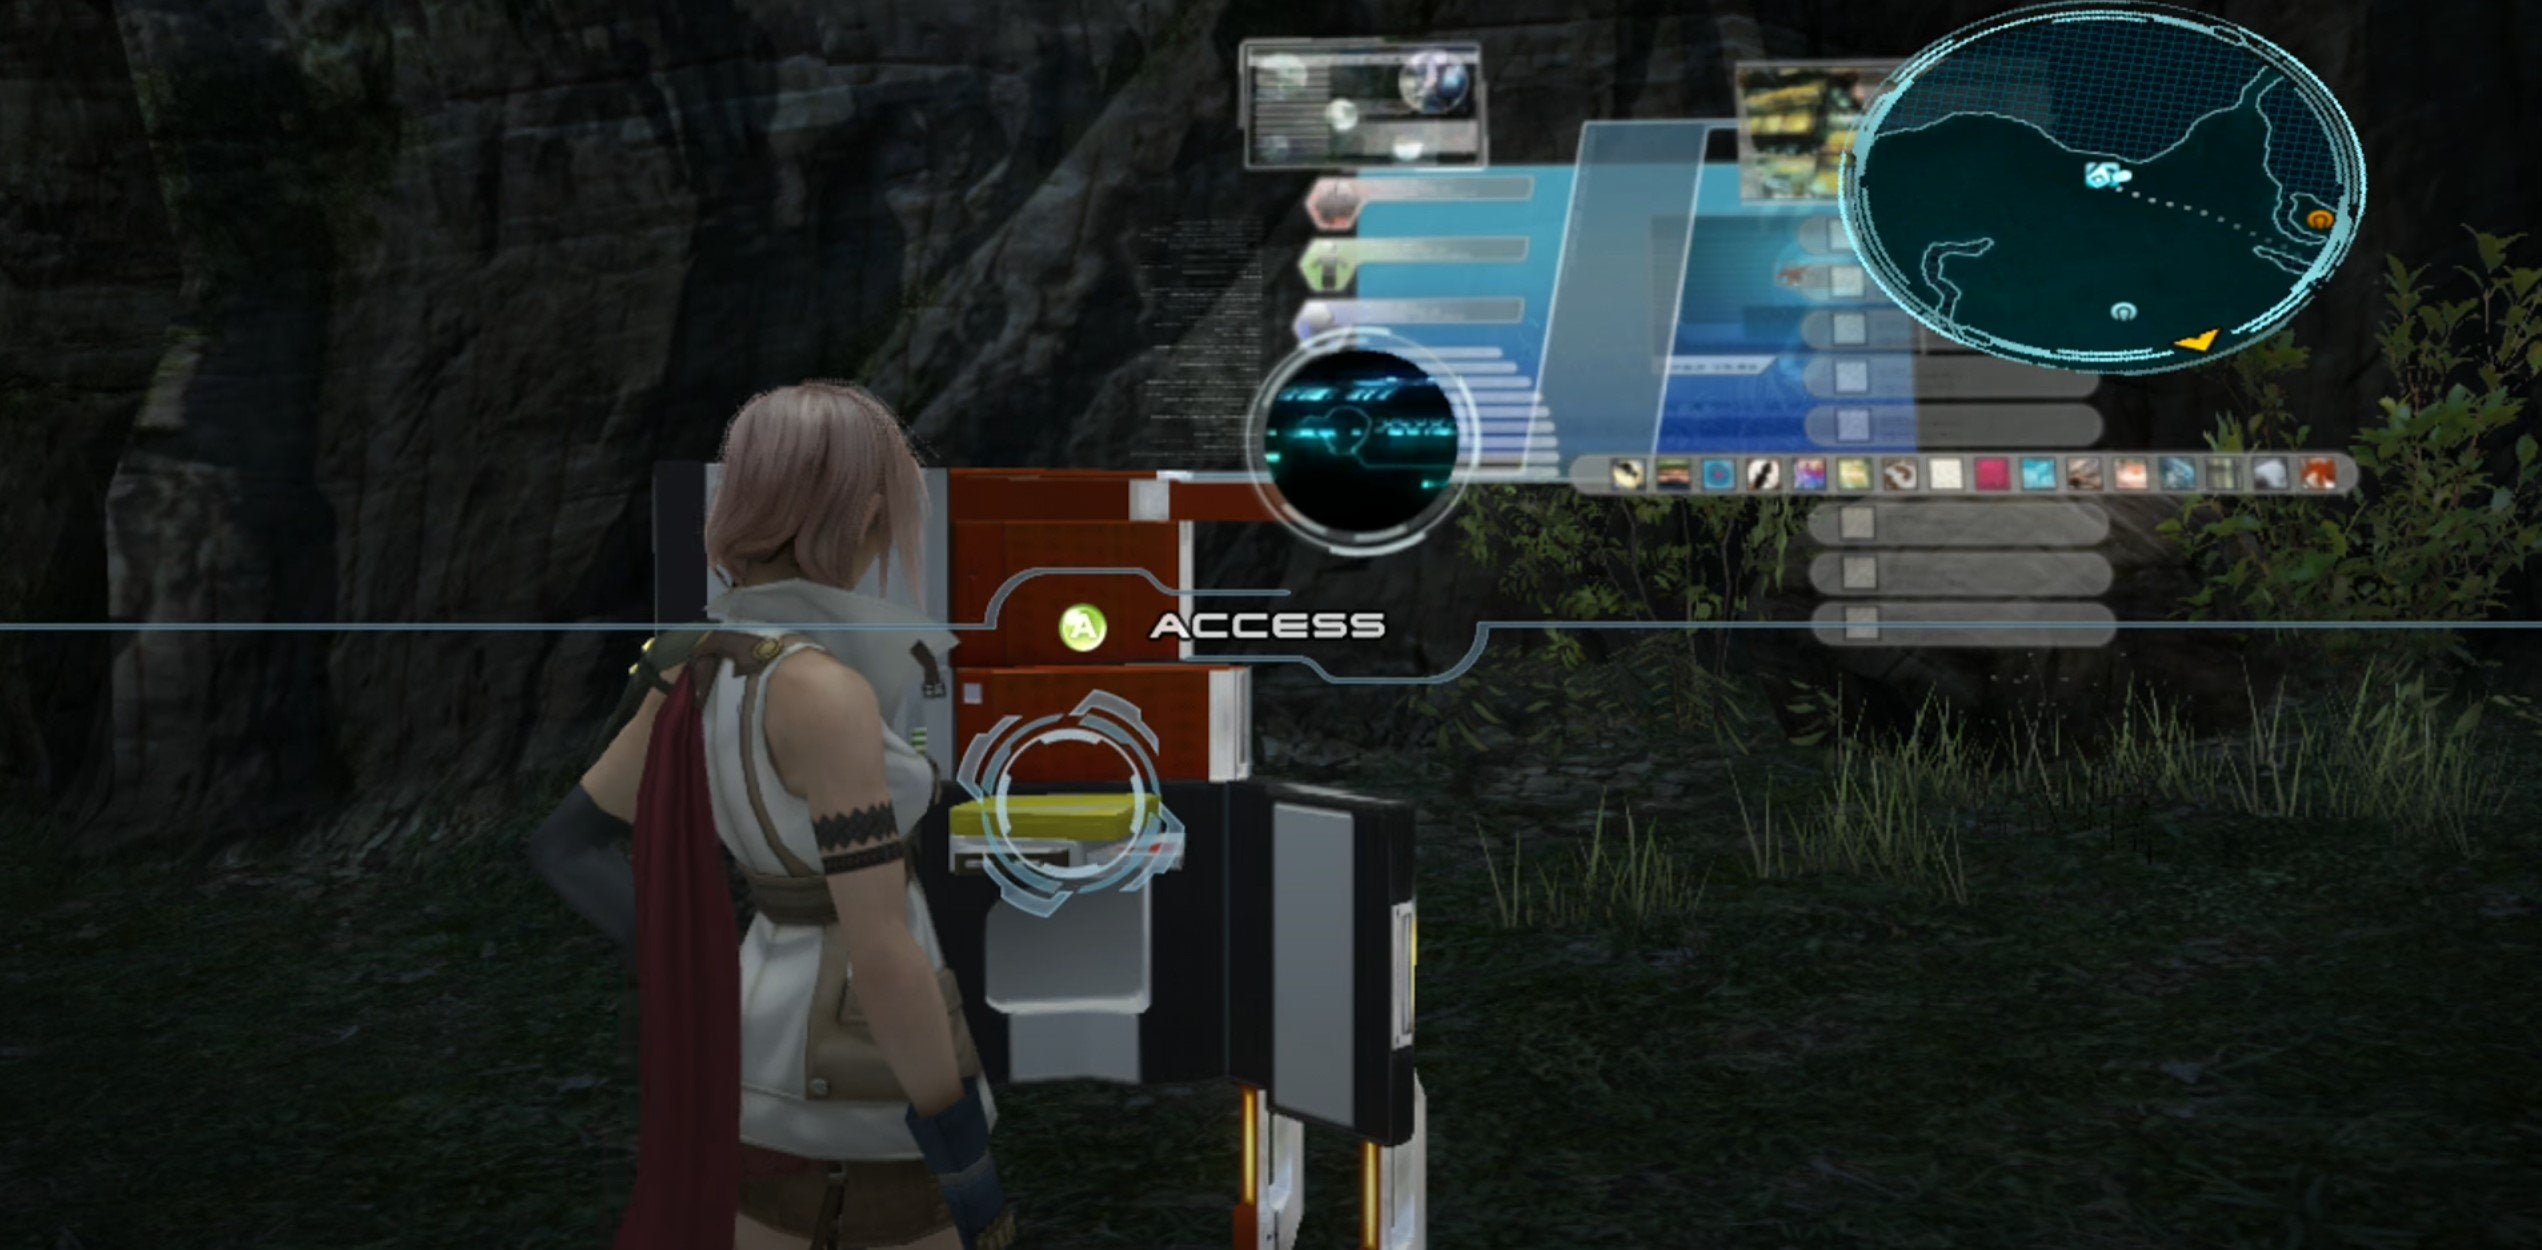 Lightning at a save spot and shop in Final Fantasy XIII. 